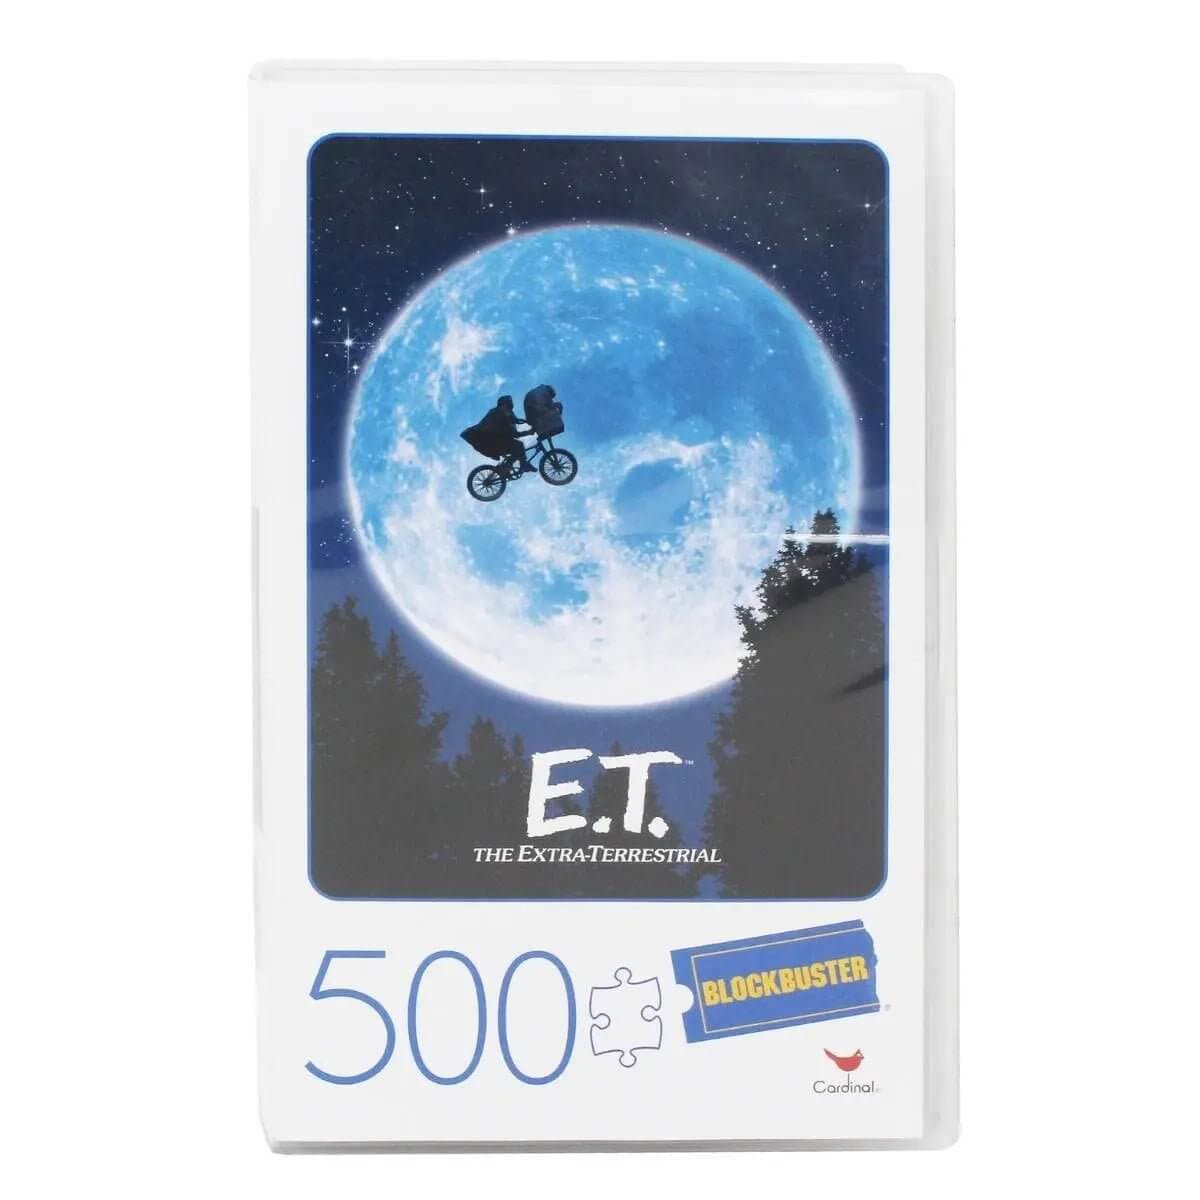 E.T. the Extra Terrestrial Movie 500pc VHS Blockbuster Jigsaw Puzzle - Simon's Collectibles